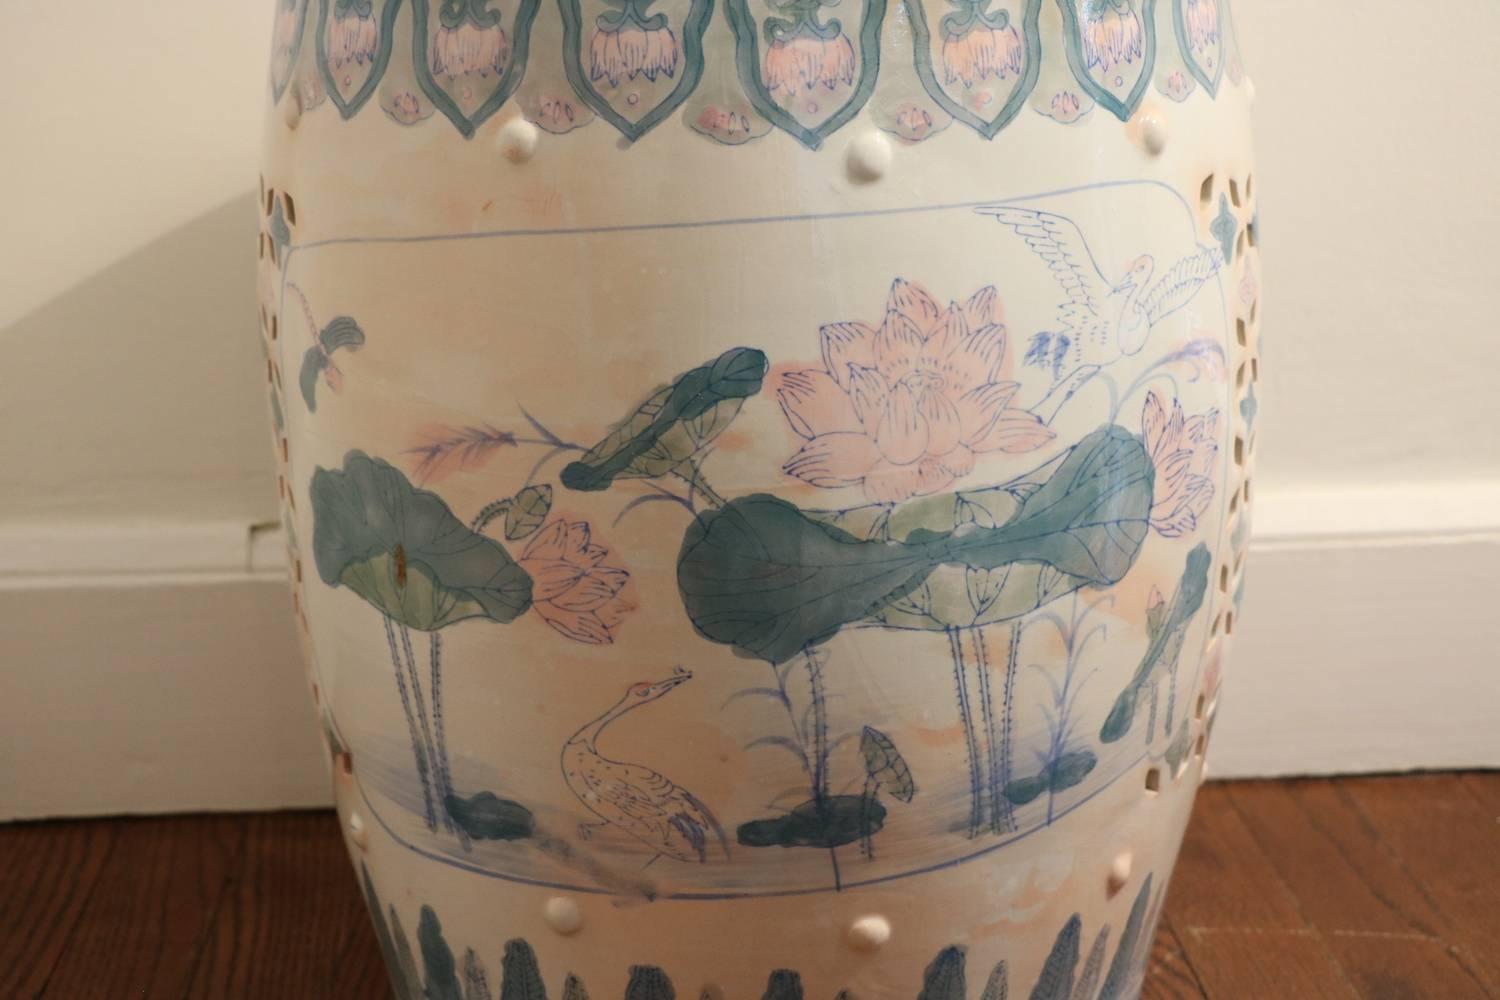 Lotus, cranes and dragon flies oh my! Ruan Cai garden stool. Opaque palette with a softer and gentler color palette or Ruan Cai (soft colors). Beautiful porcelain garden stool cut-out designs with raised bosses and a glossy finish. Lovely mellow